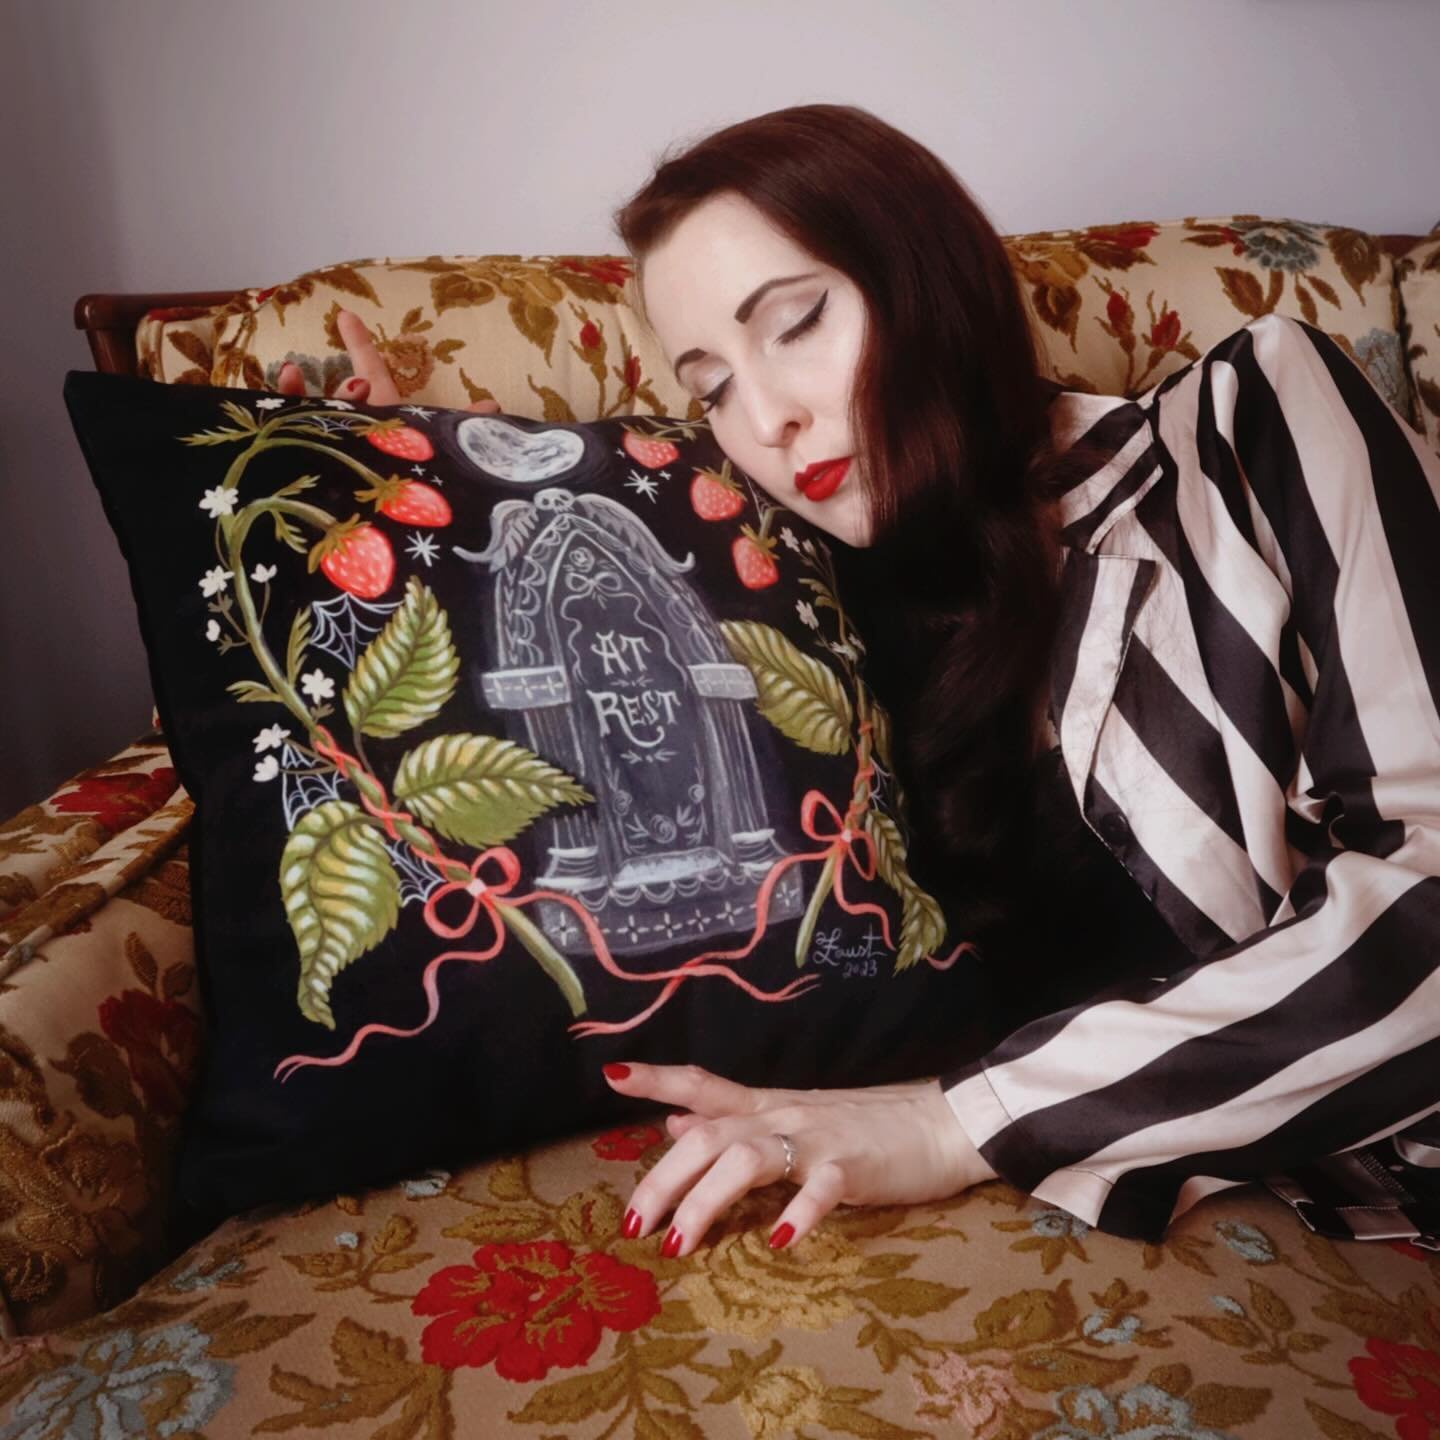 Me &amp; Henri dreaming of these pillows all going off to their new spooky homes🖤🍓🪦✨ **This is the last day to order a 𝑺𝒕𝒓𝒂𝒘𝒃𝒆𝒓𝒓𝒚 𝑩𝒖𝒓𝒊𝒂𝒍  velveteen pillowcase! 

🙏Thank you SO much to the folks who have orders so far!! I&rsquo;m s